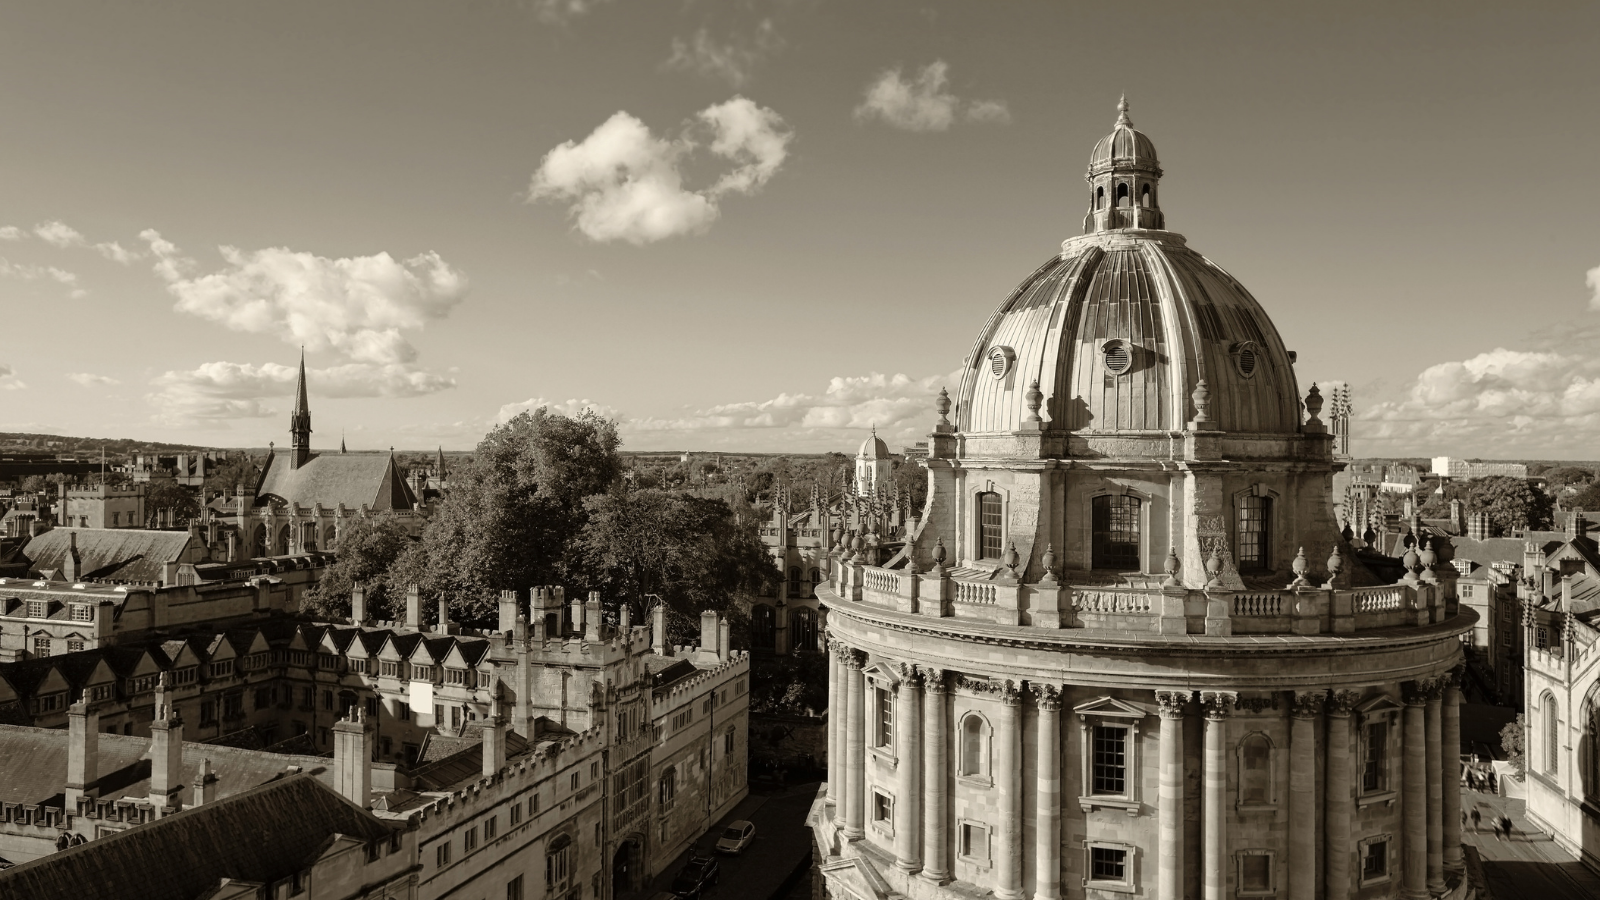 Oxford Gives crowdfunding event